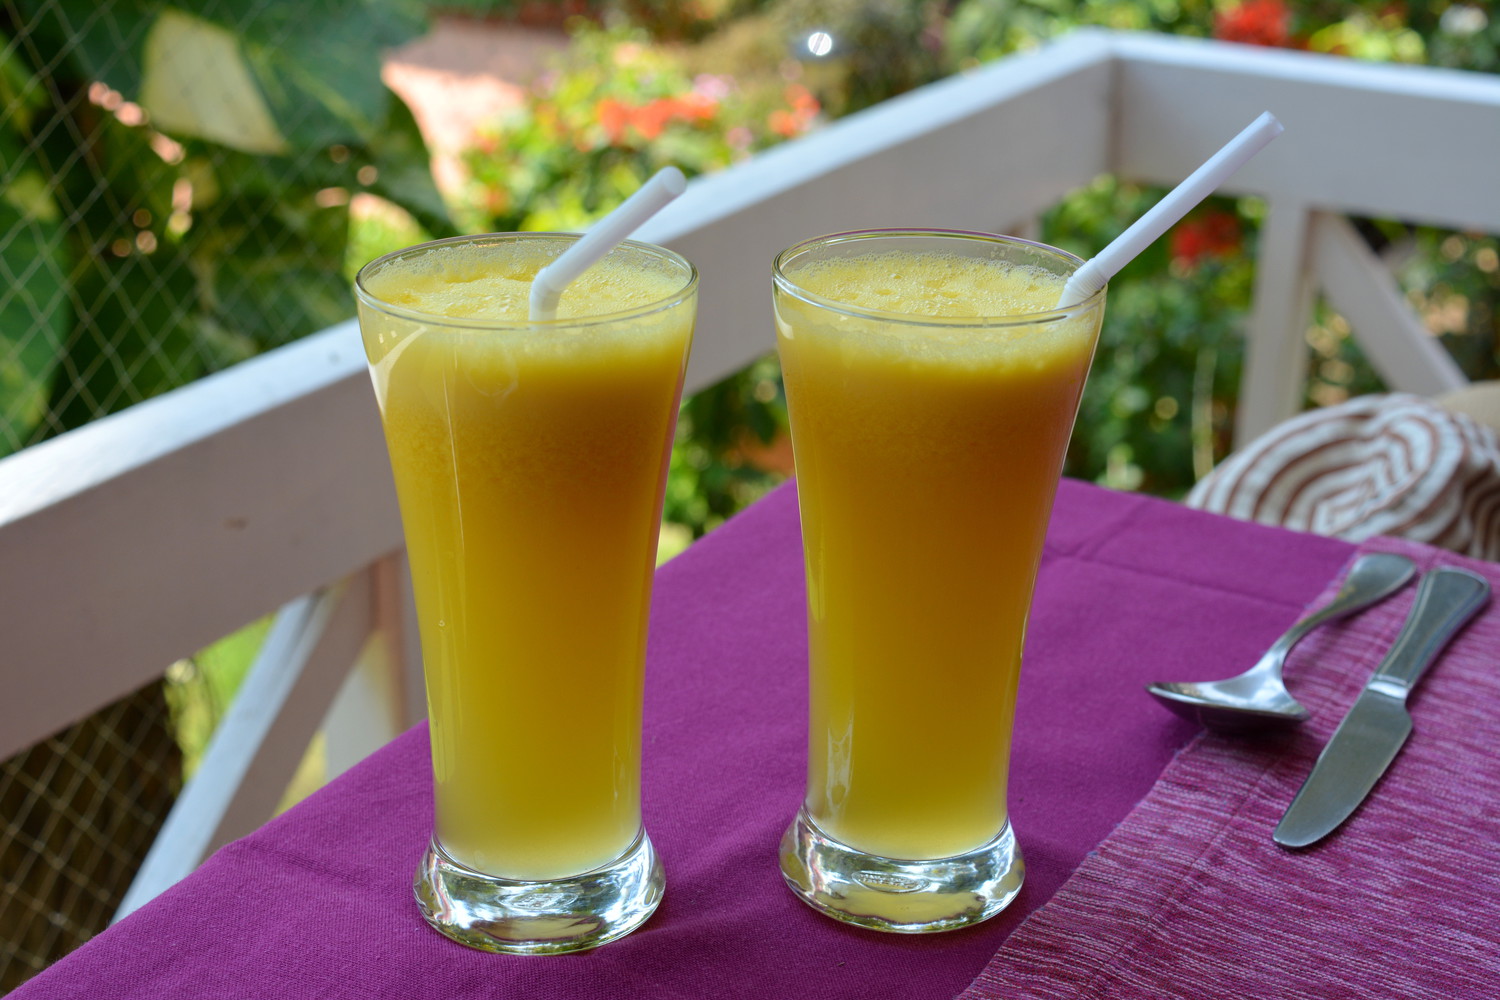 Two glasses of pineapple juice